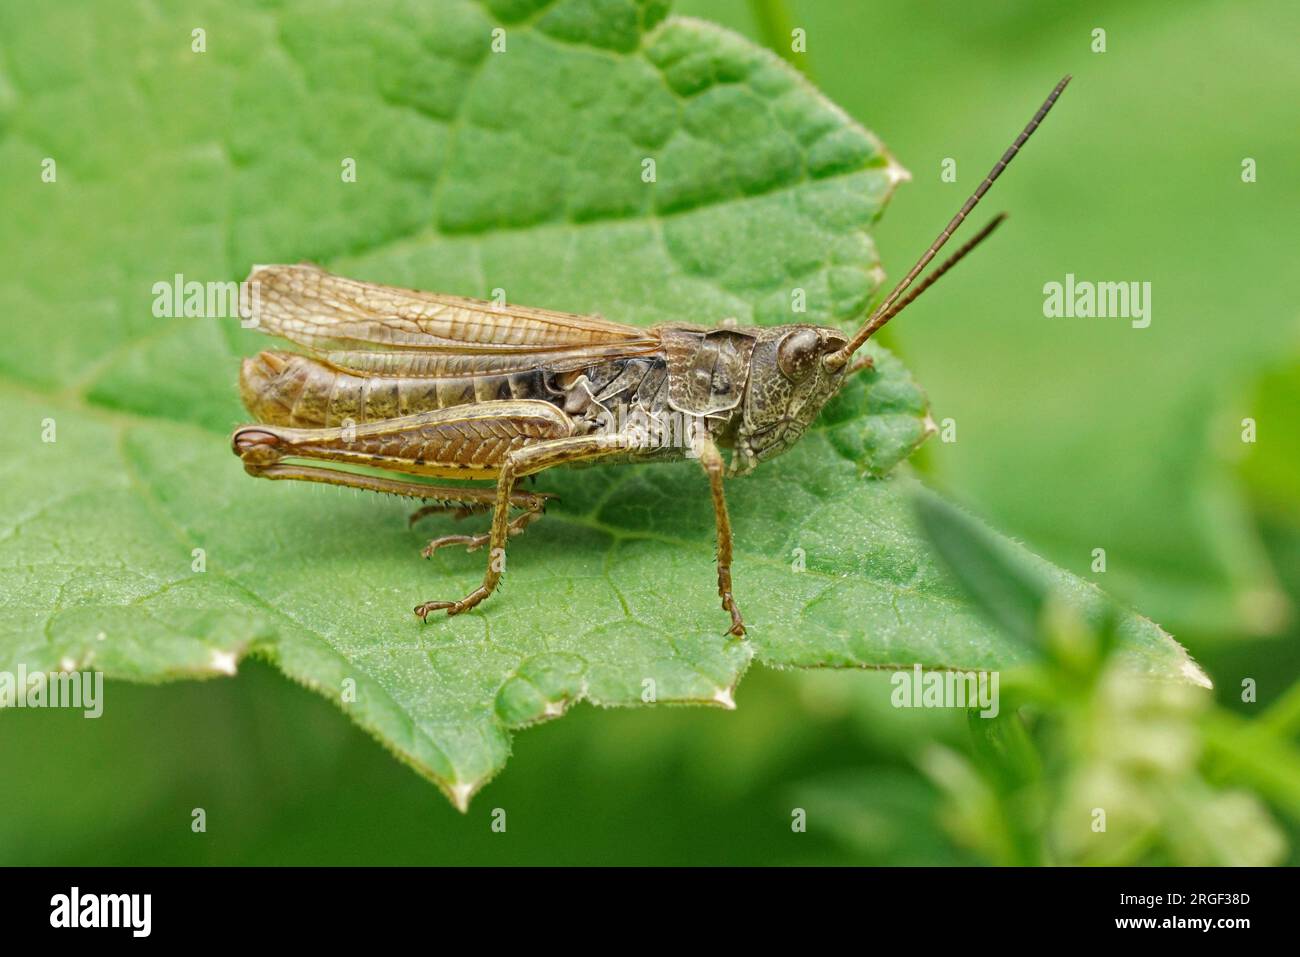 Natural closeup on the brownb upland field grasshopper, Chorthippus apricarius sitting on a green leaf Stock Photo